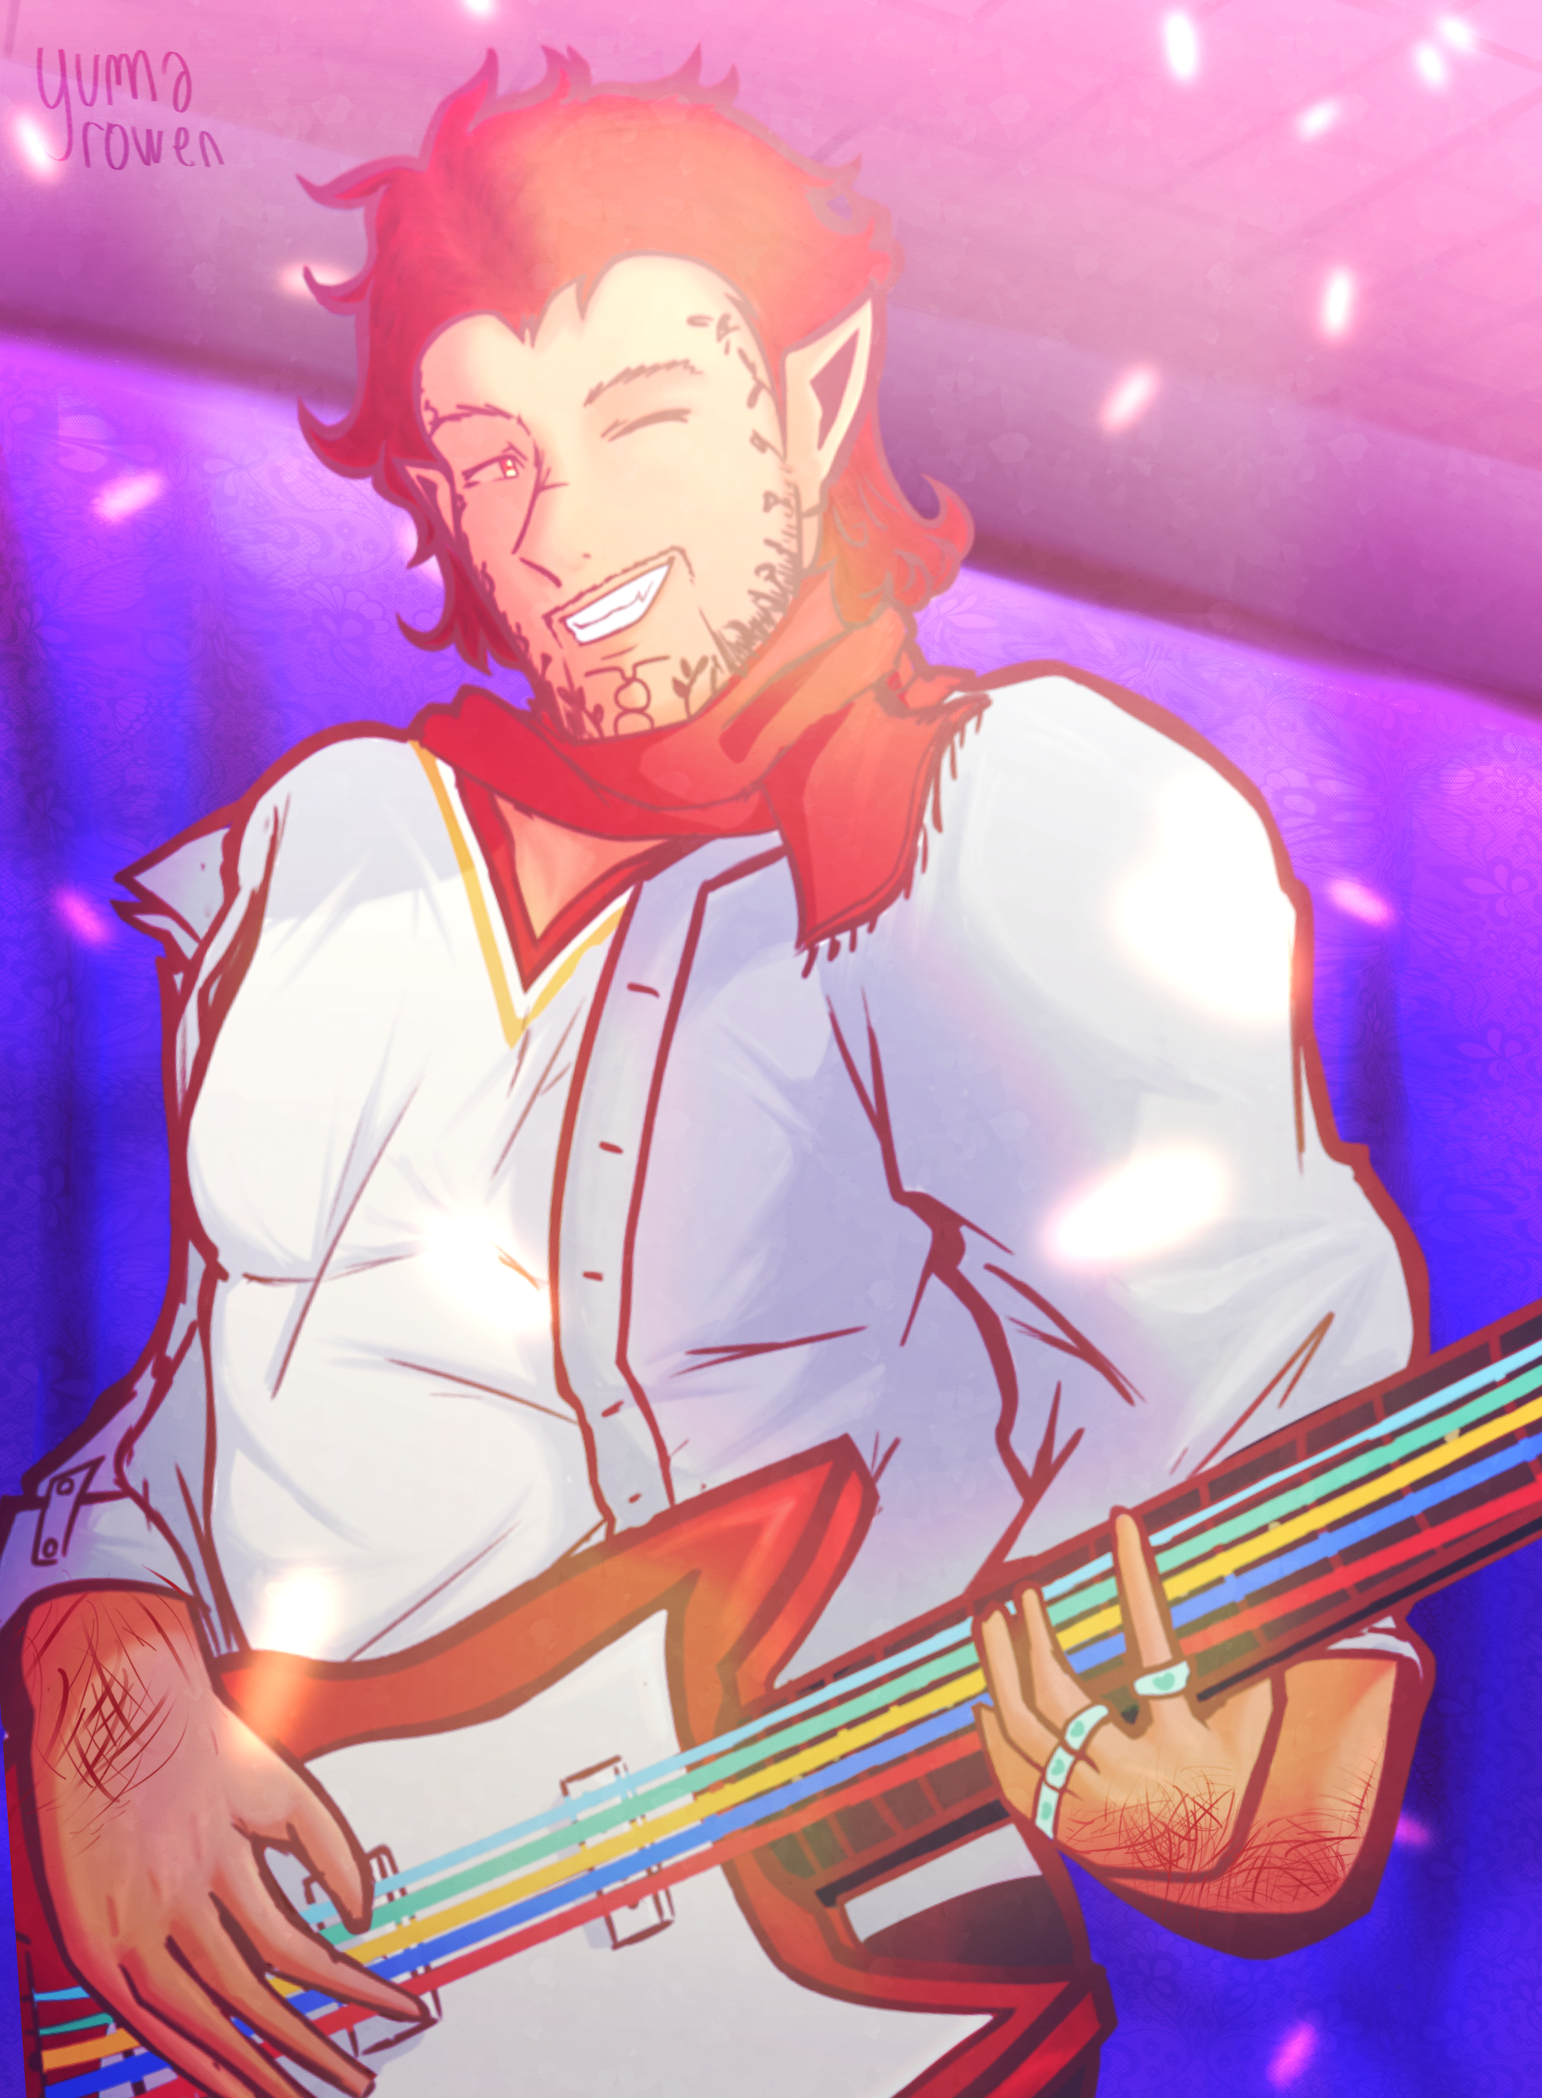 An illustration of Esen, yumarowen's Baldur's Gate 3 character; wearing Kaito's Holiday Module from Project Diva. He's playing the guitar, which has 5 strings; all colored to Idolm@ster's branches colors.